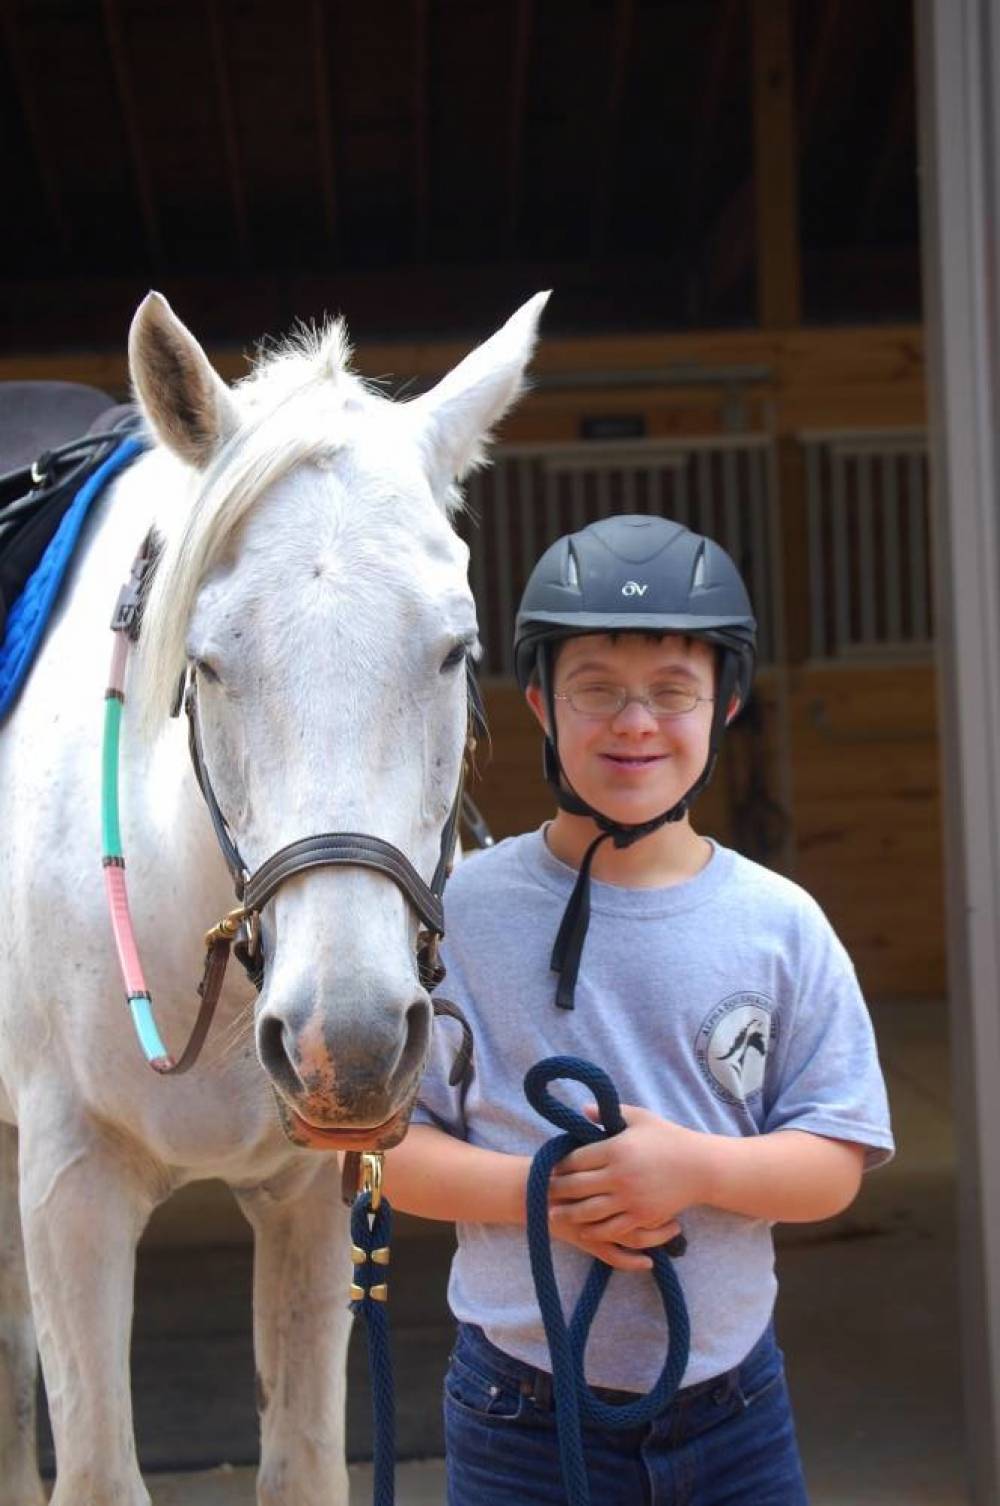 TOP GEORGIA SPORTS CAMP: Heaven s Gait Therapeutic Riding is a Top Sports Summer Camp located in Woodstock Georgia offering many fun and enriching Sports and other camp programs. 